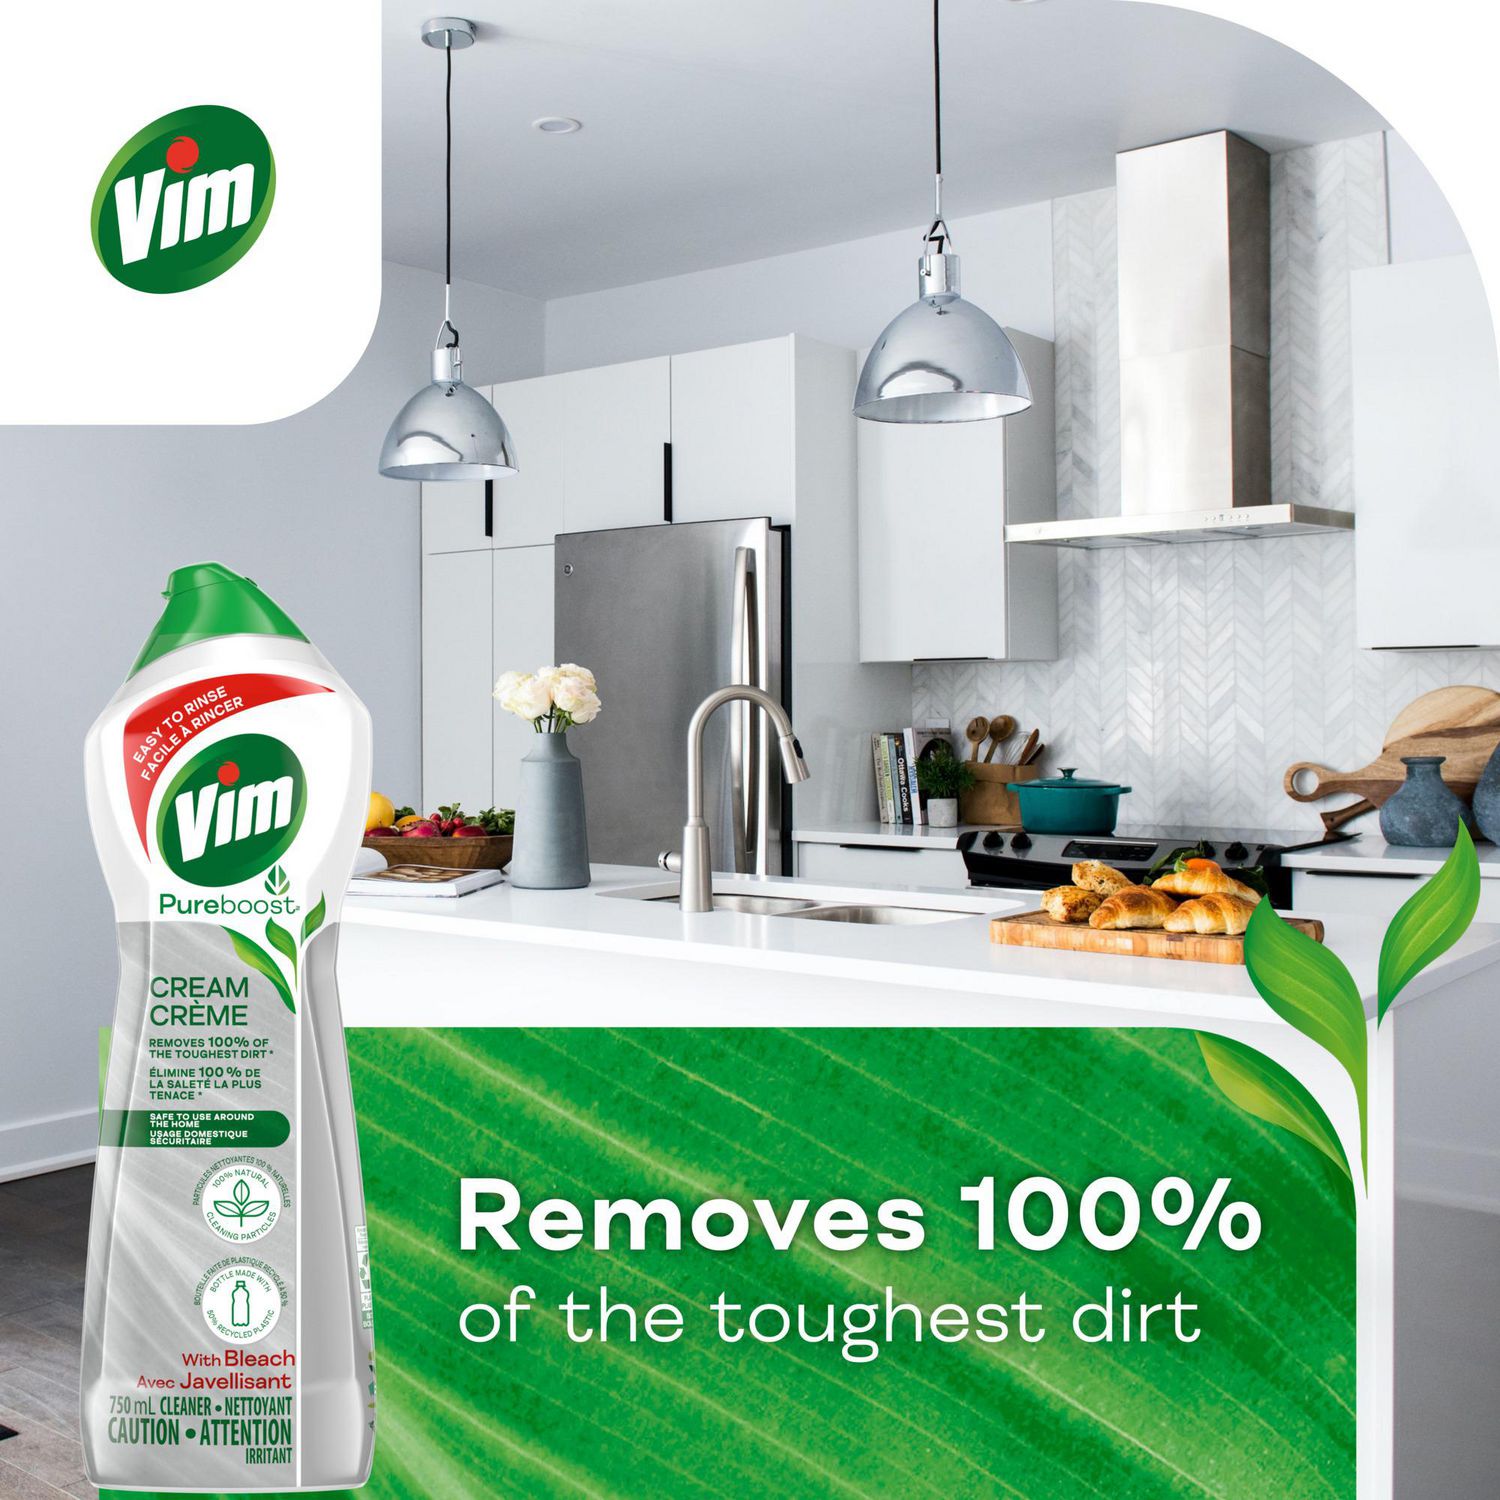 Vim Cream Cleaner with Bleach reviews in Household Cleaning Products -  ChickAdvisor